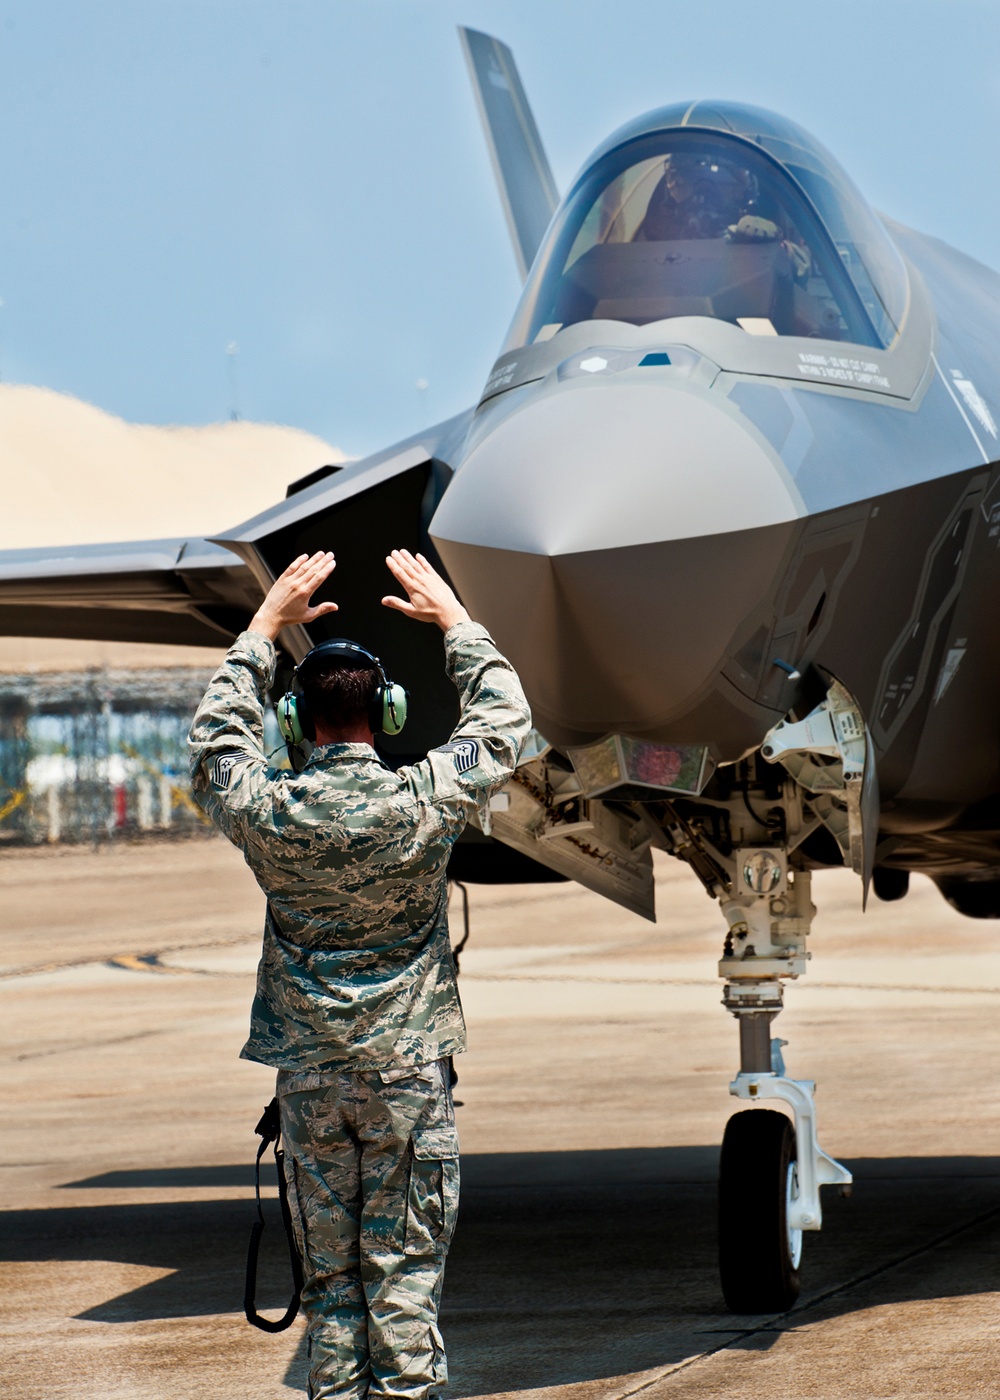 First F-35 arrives at Eglin